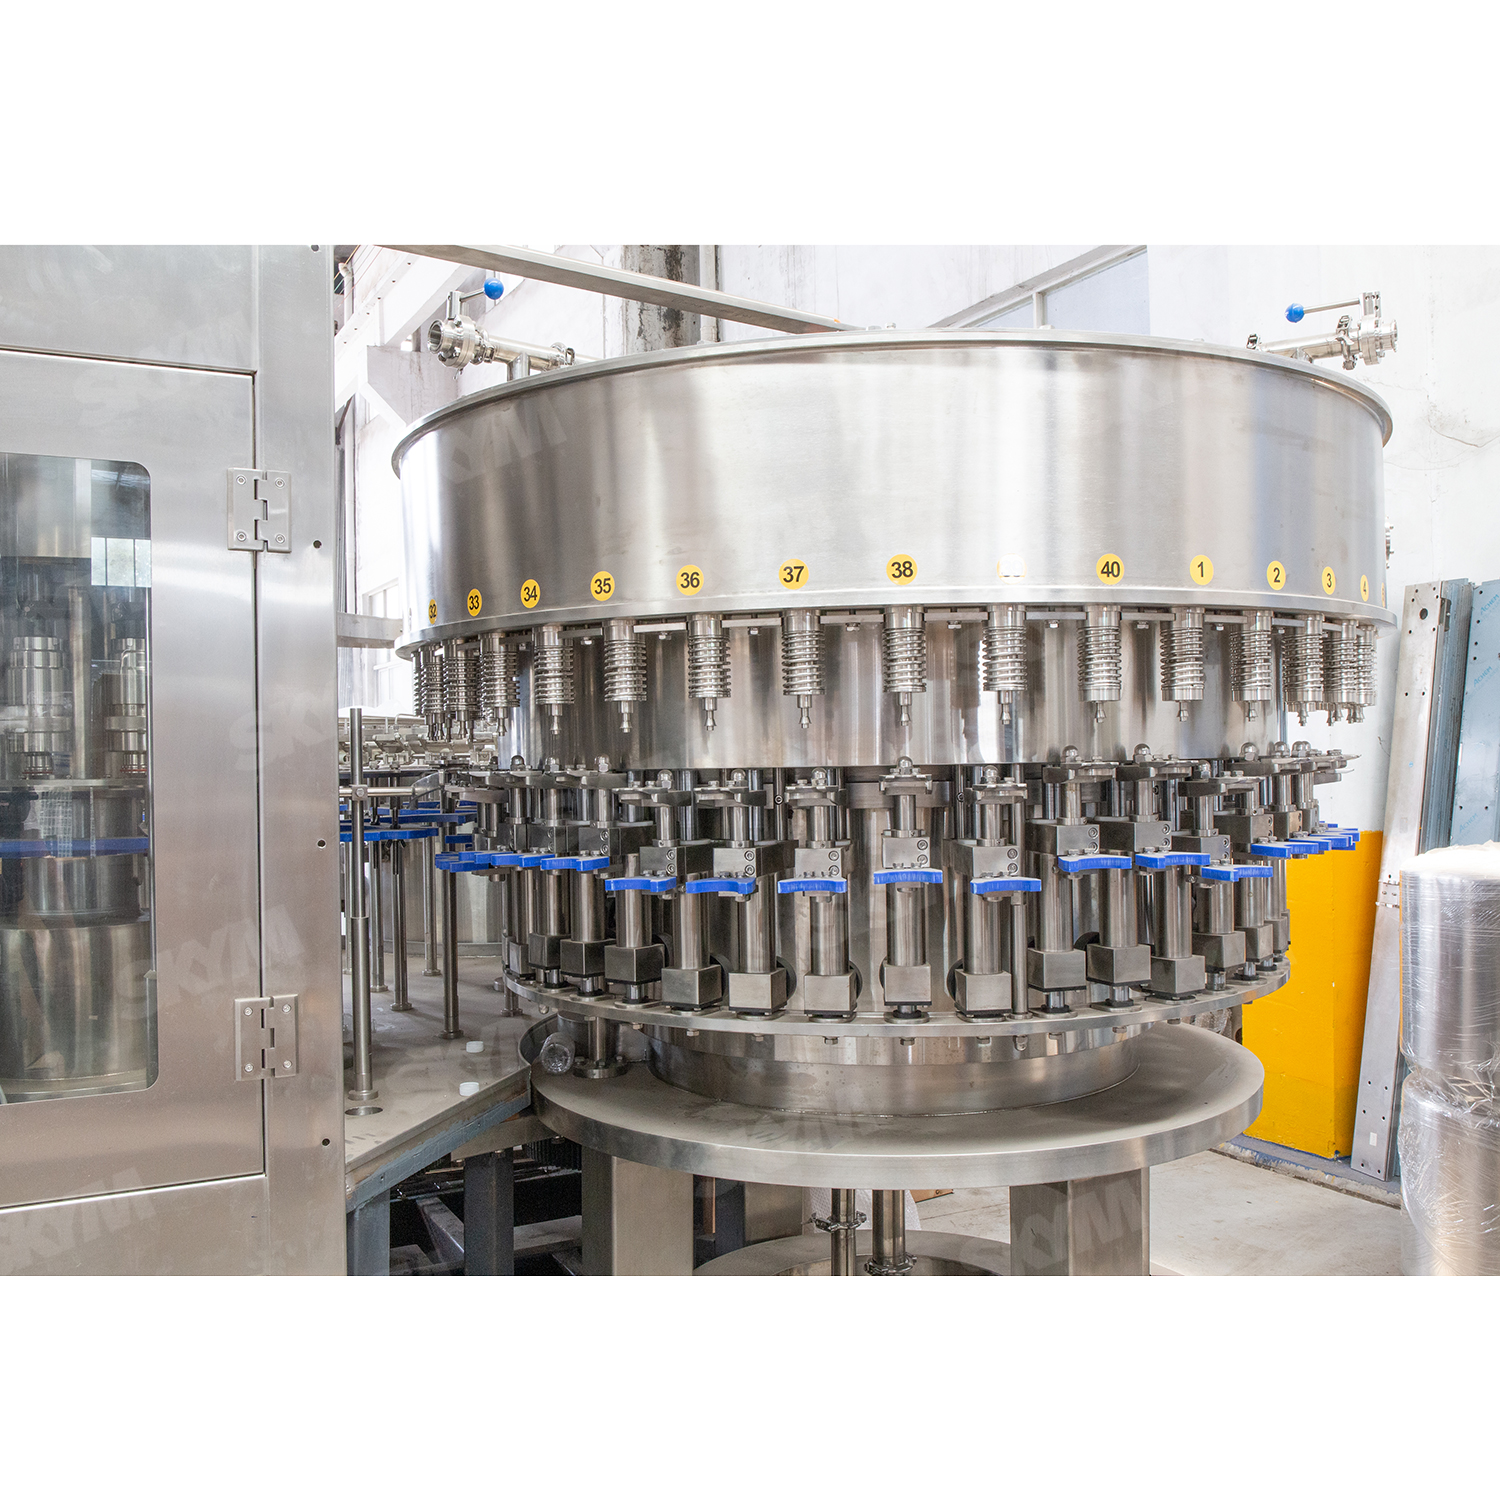 High Speed Industrial Mineral Water Filling Machine 